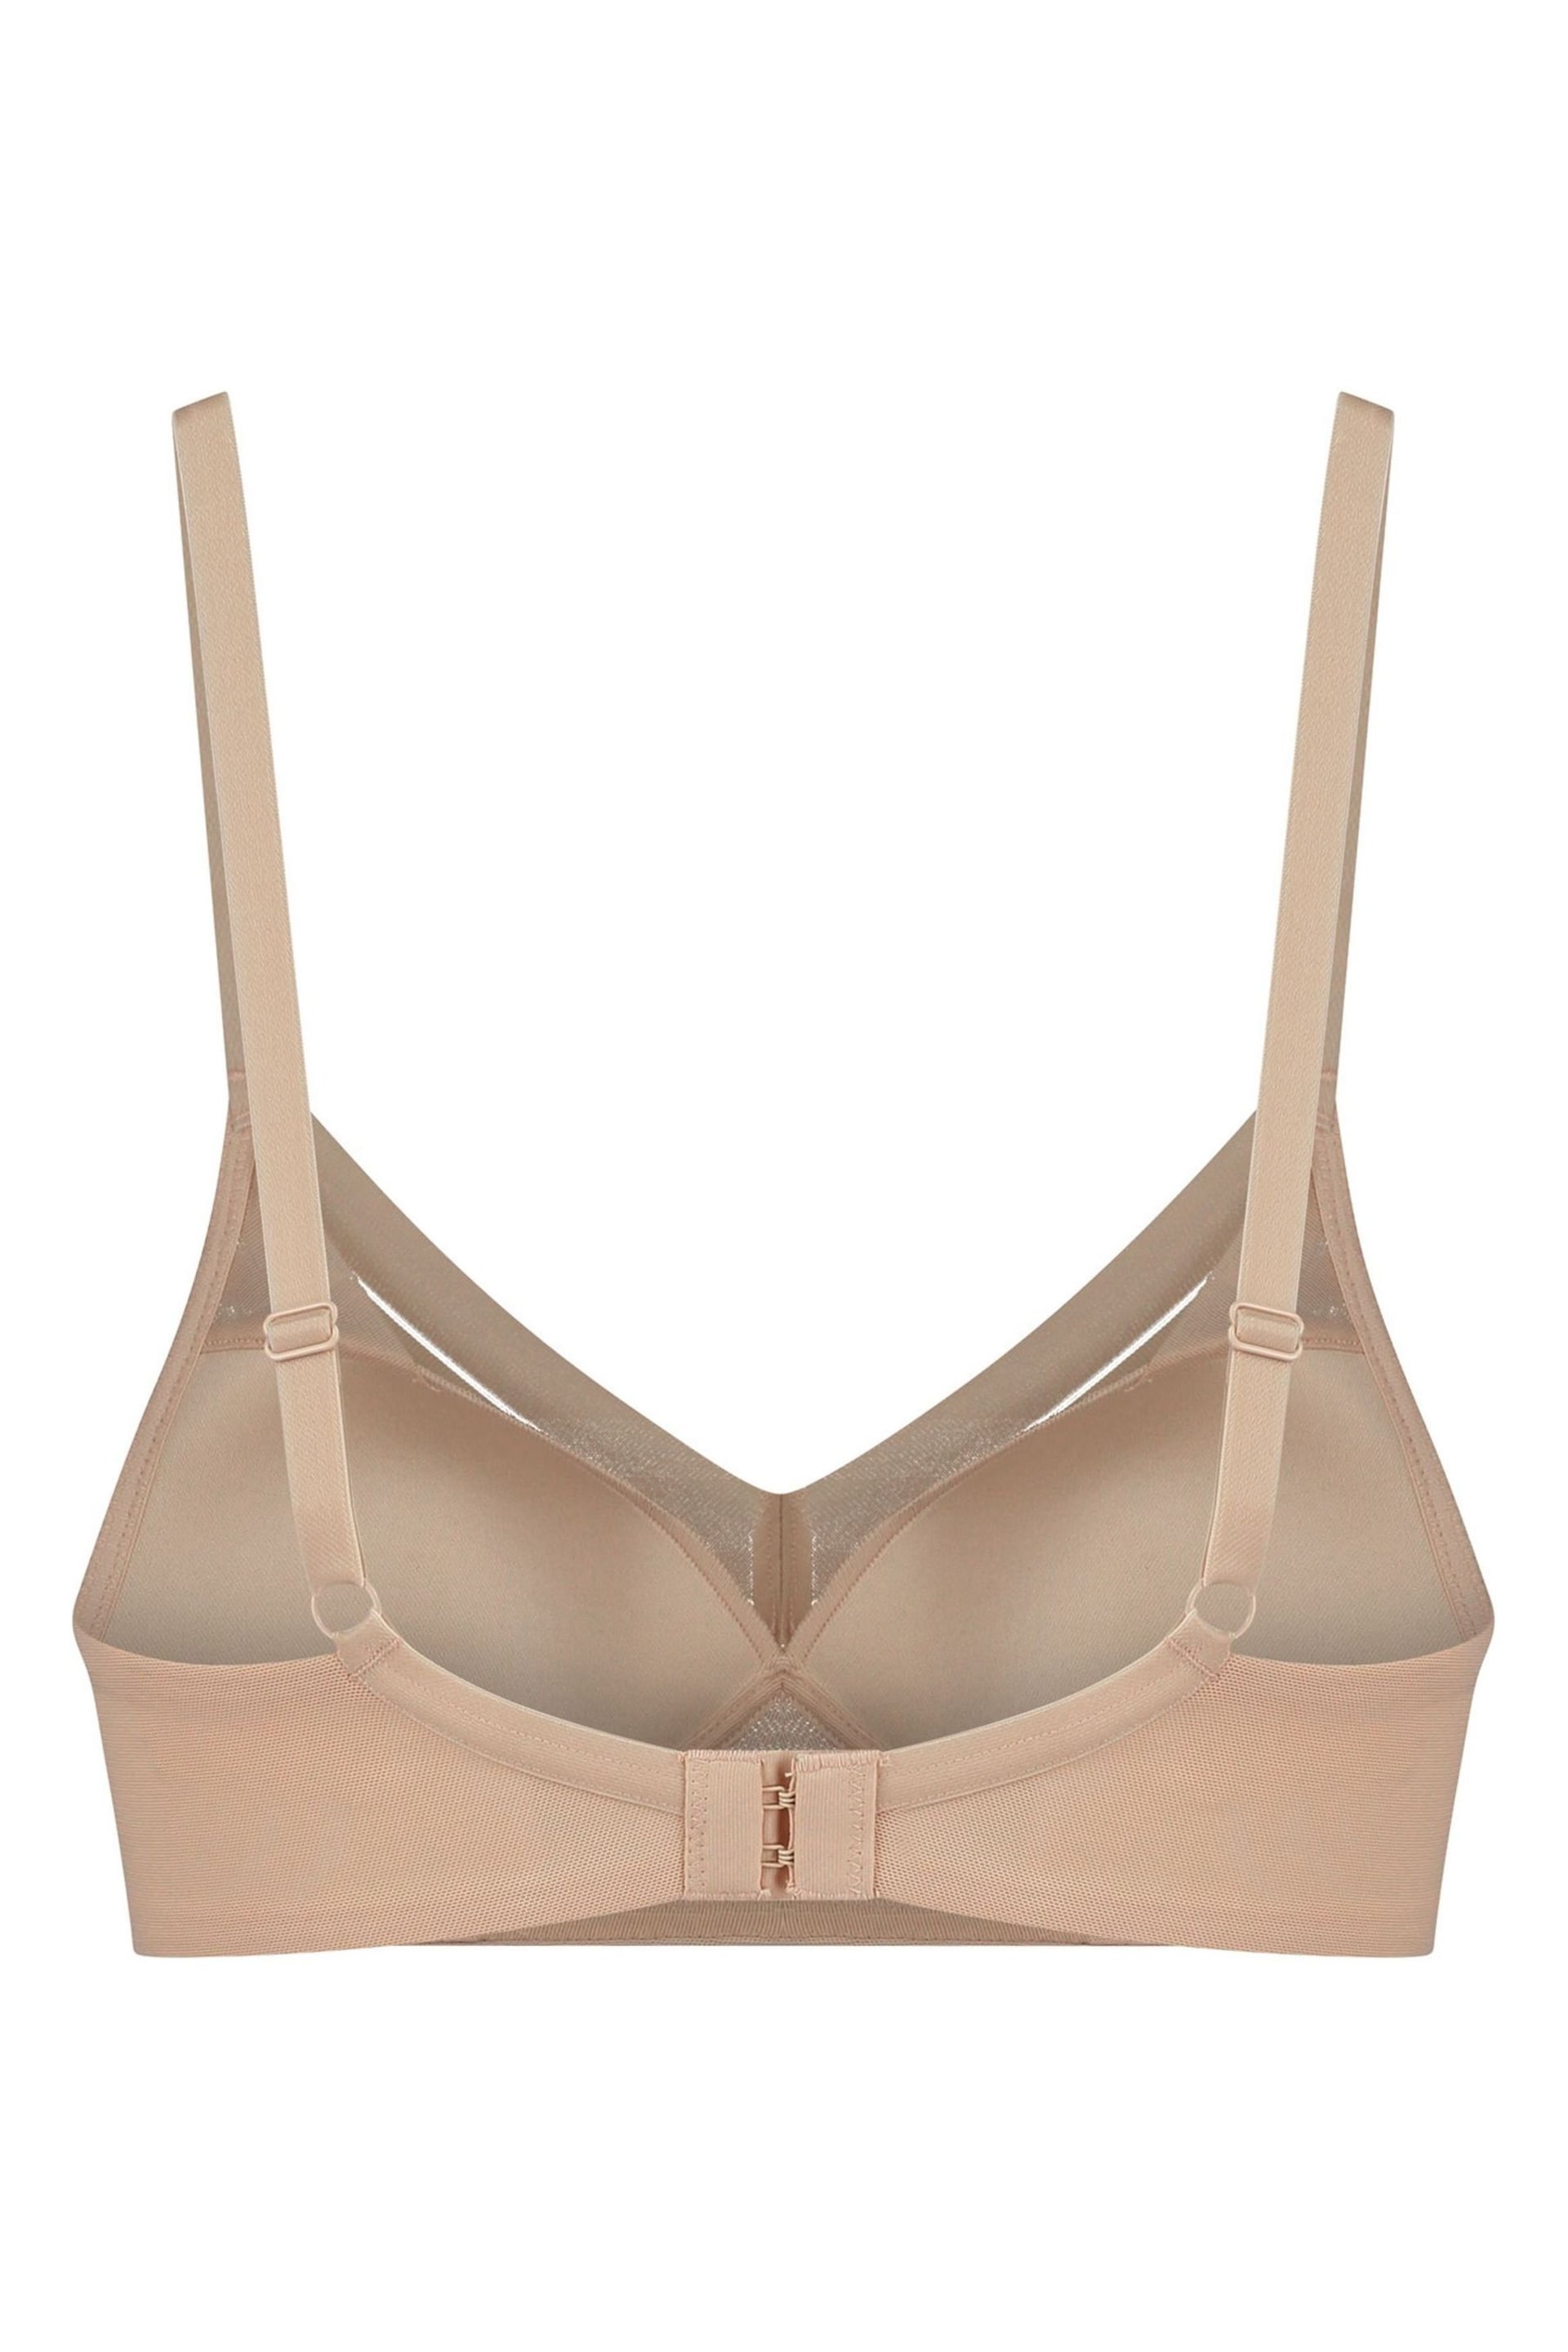 Bye Bra Nude Wire Free Lace Bra Top - Image 5 of 5